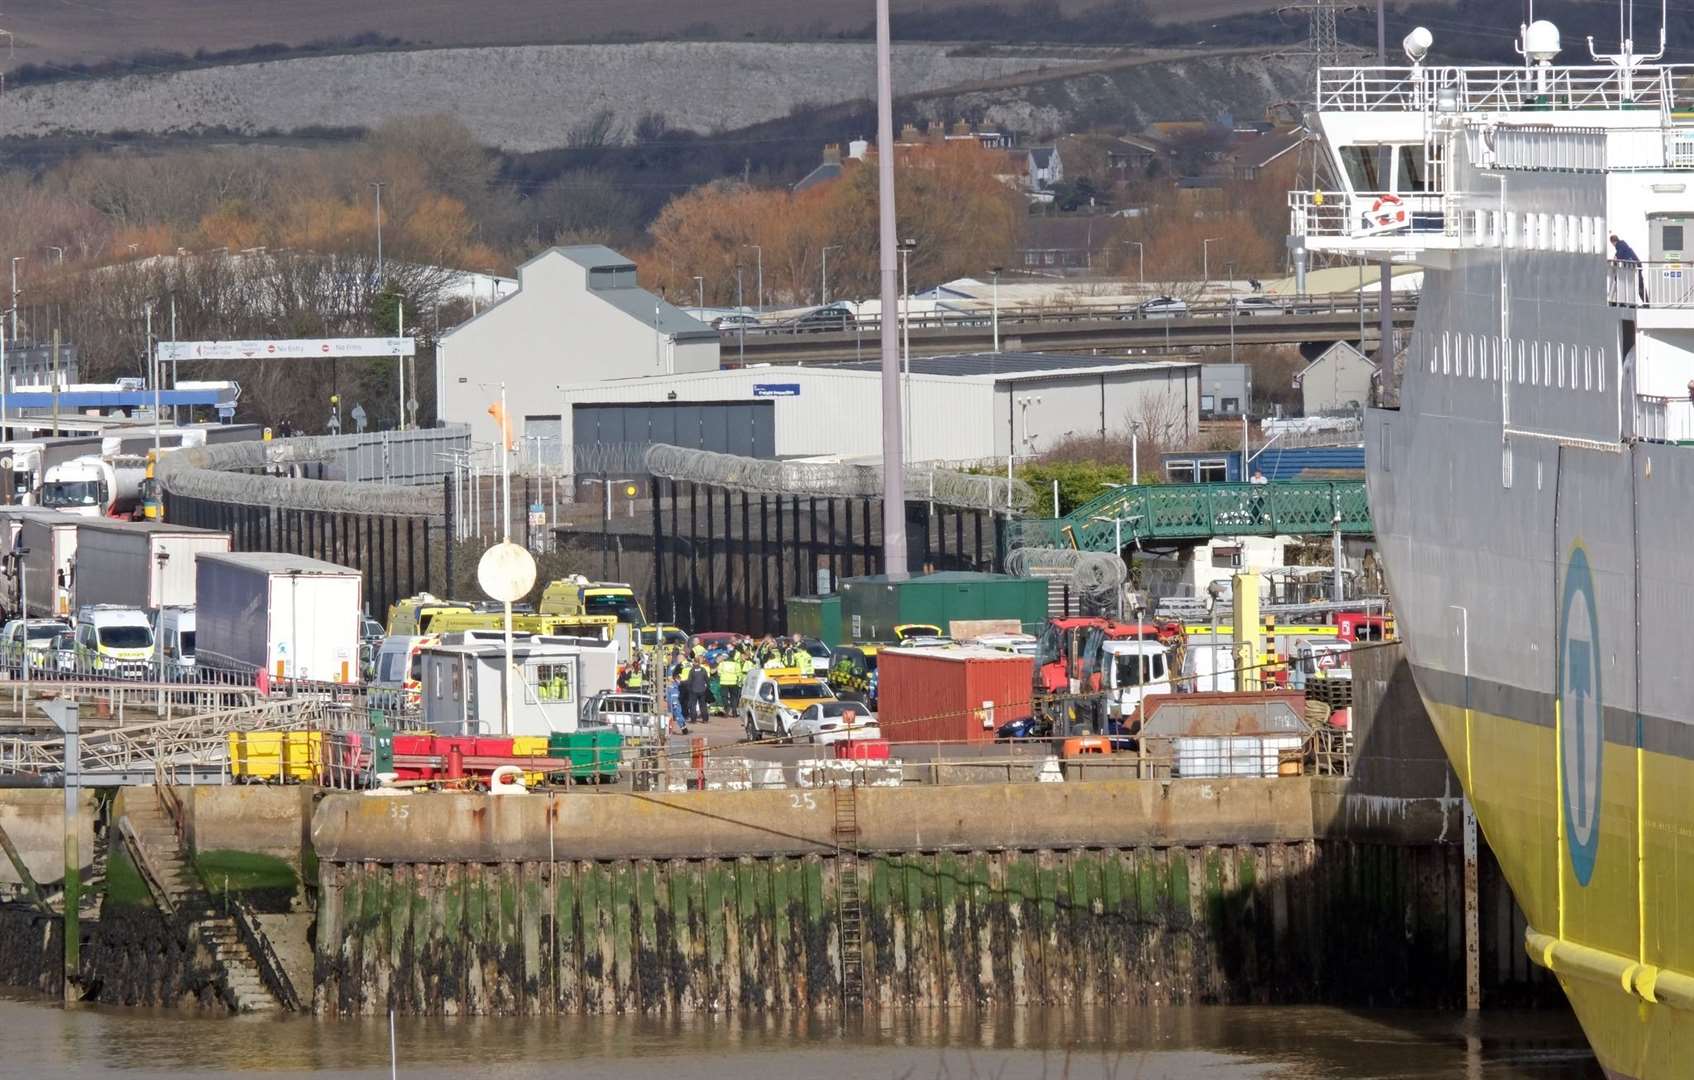 The discovery sparked a major emergency services response on Friday (Martin Sinnock/PA)